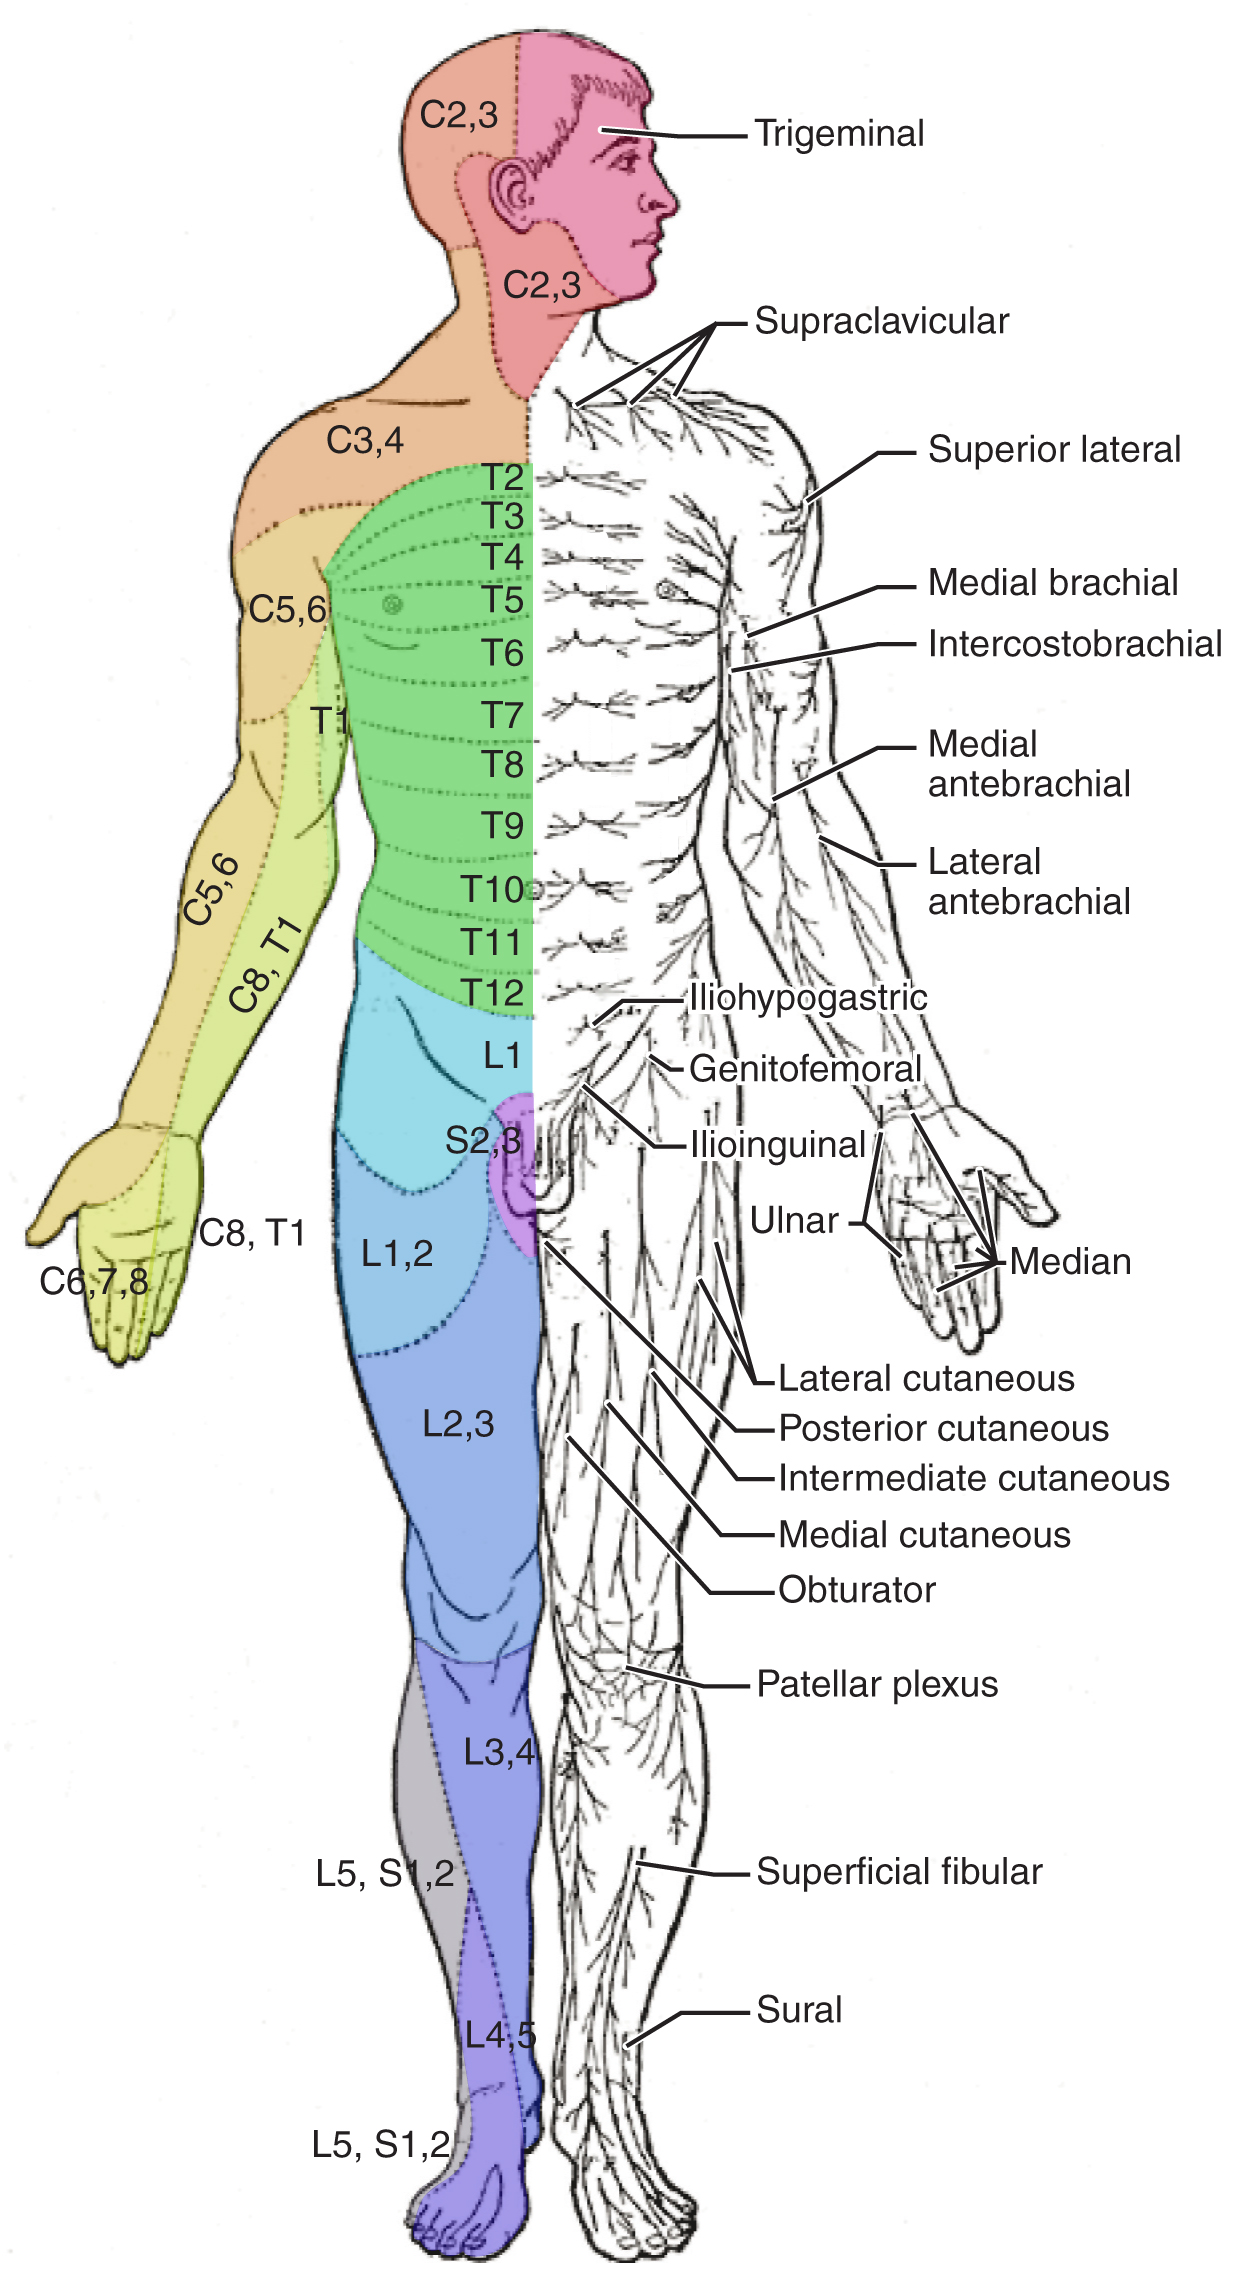 Body divided into regions based on spinal nerve innervation